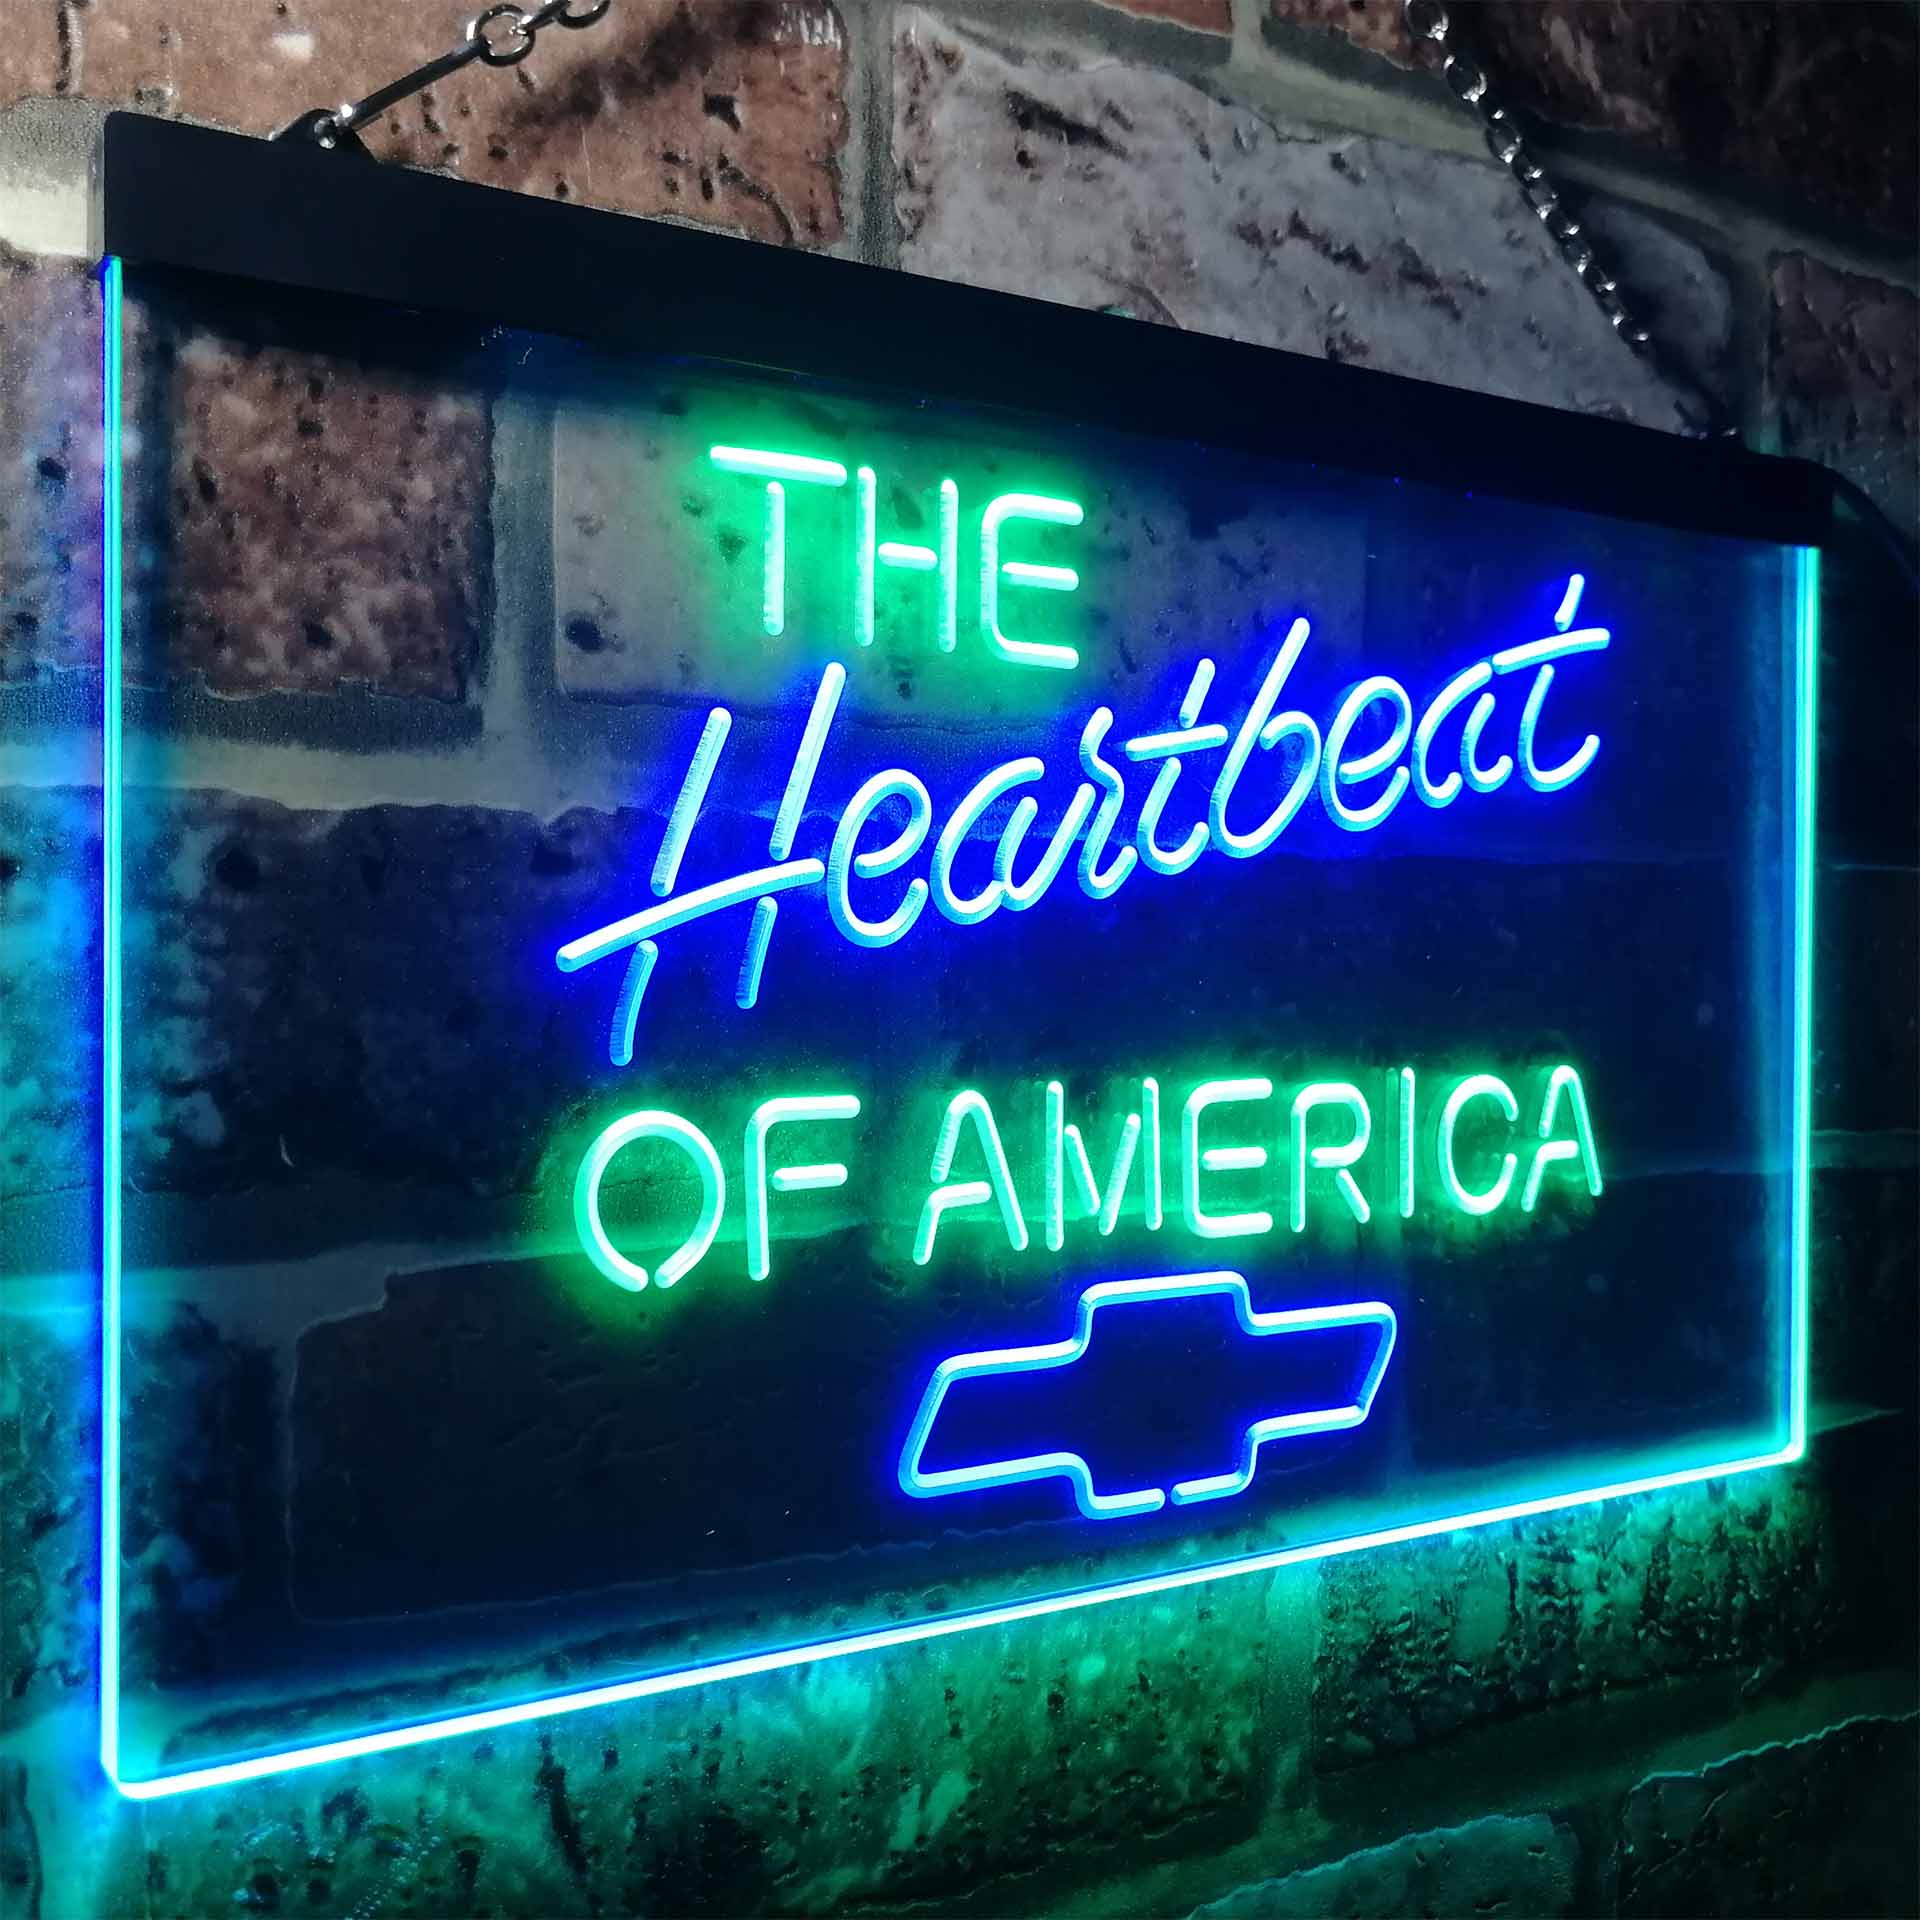 Chevrolet Heartbeat of America Neon LED Sign